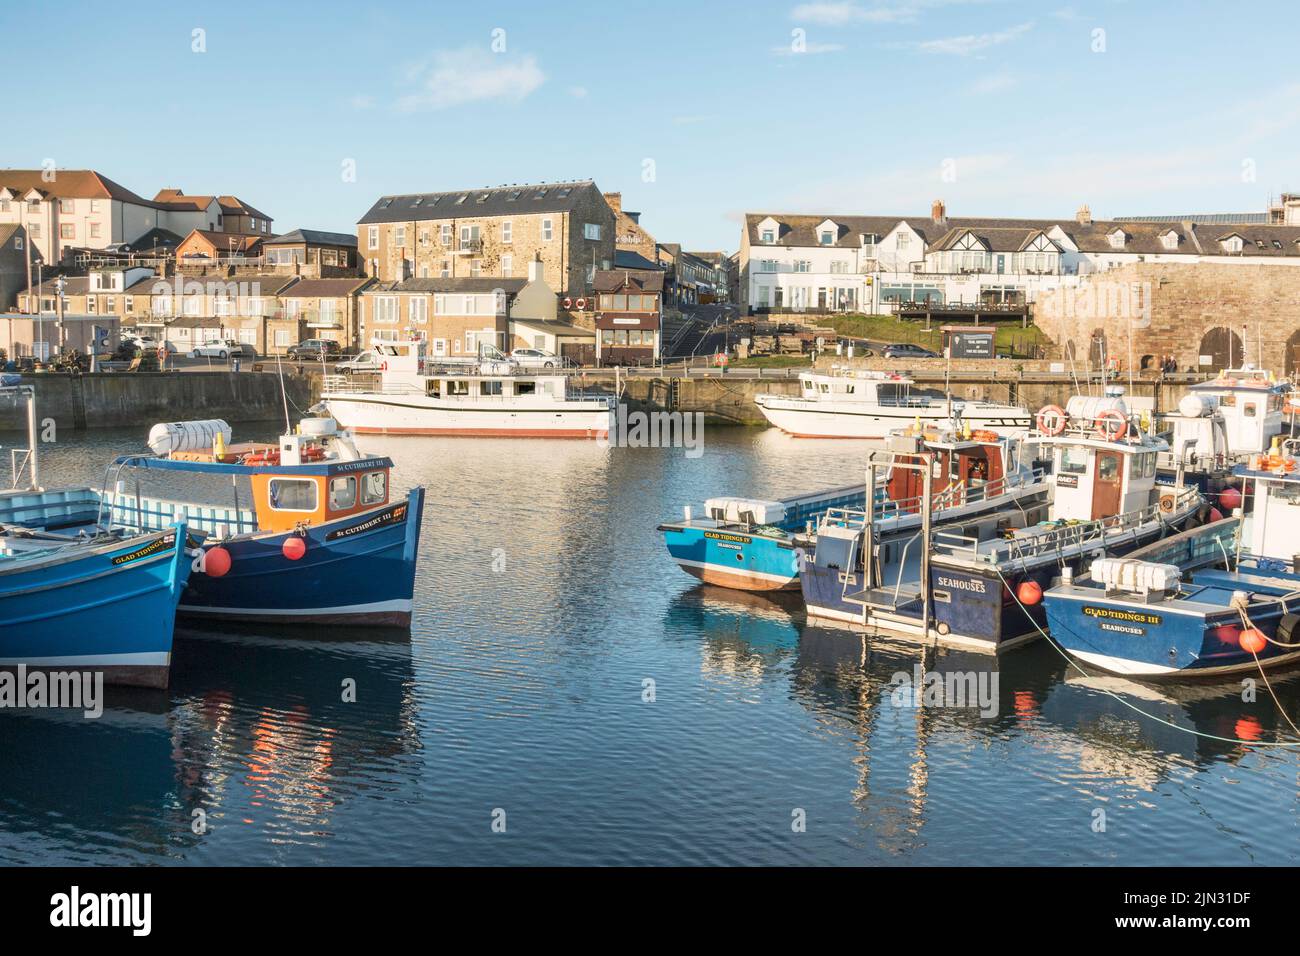 Boats moored in North Sunderland harbour, Seahouses, Northumberland, England, UK Stock Photo